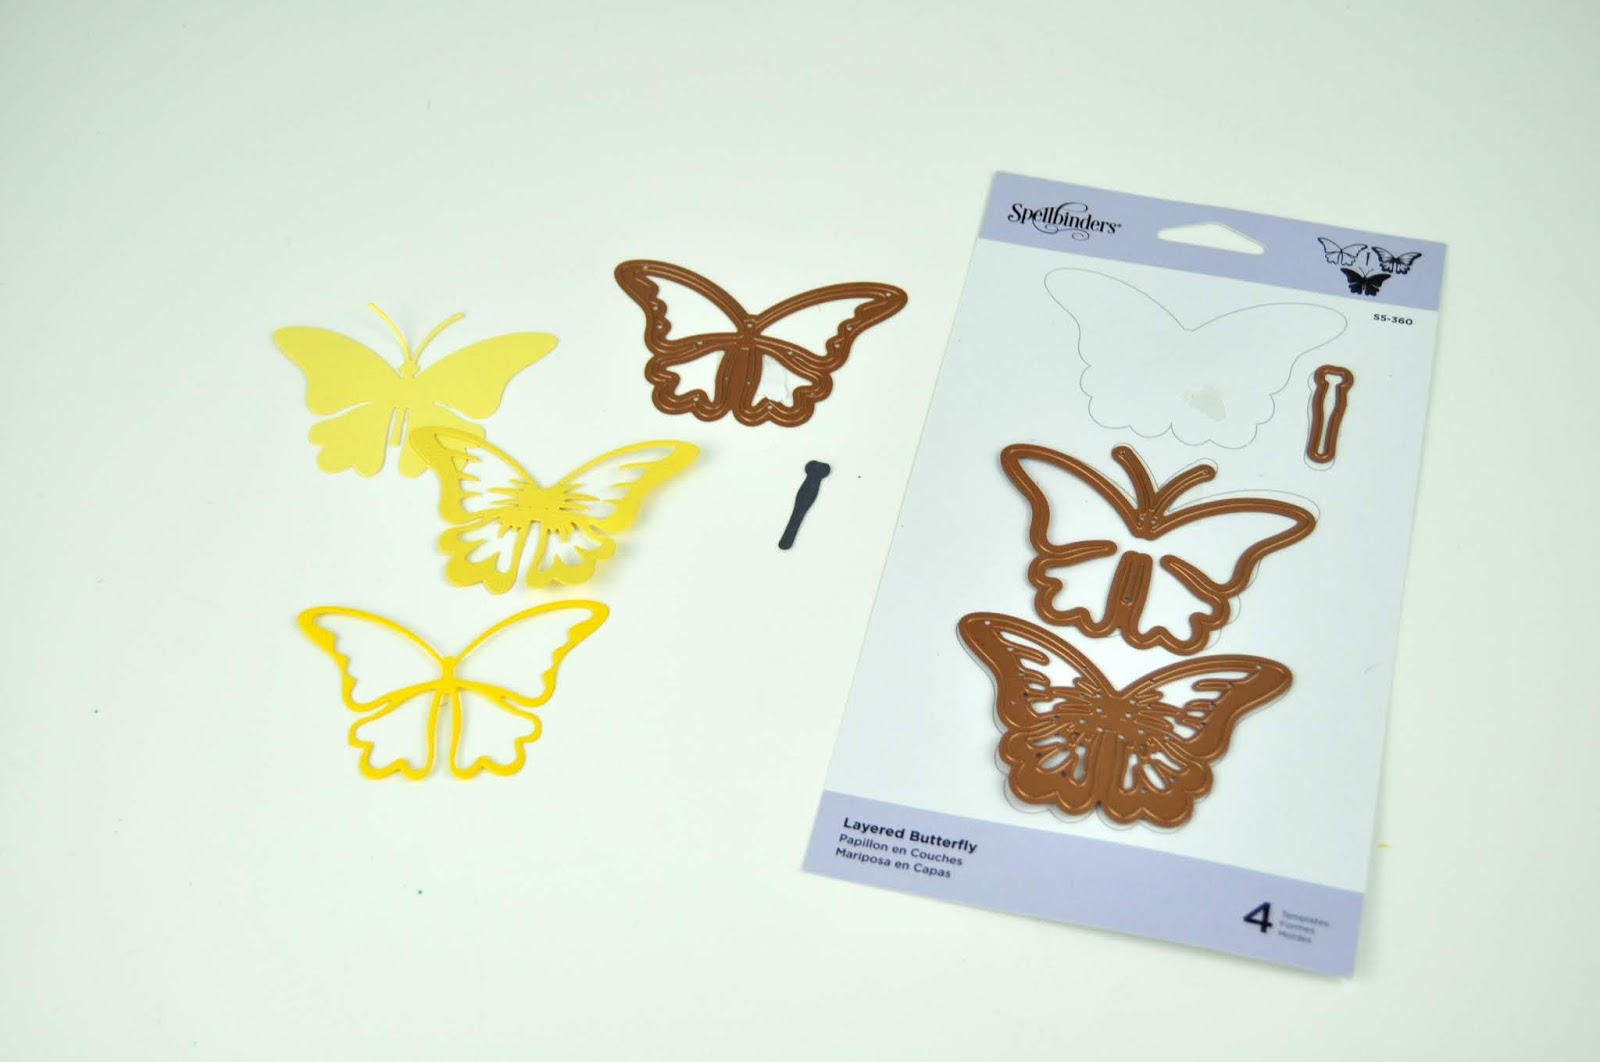 Spellbinders Exclusive Indie Die collection. Jen Gallacher die cuts a layered butterfly from different colors of cardstock using exclusive Spellbinders die sets. #diecutting #spellbinders #jengallacher #cardmaking